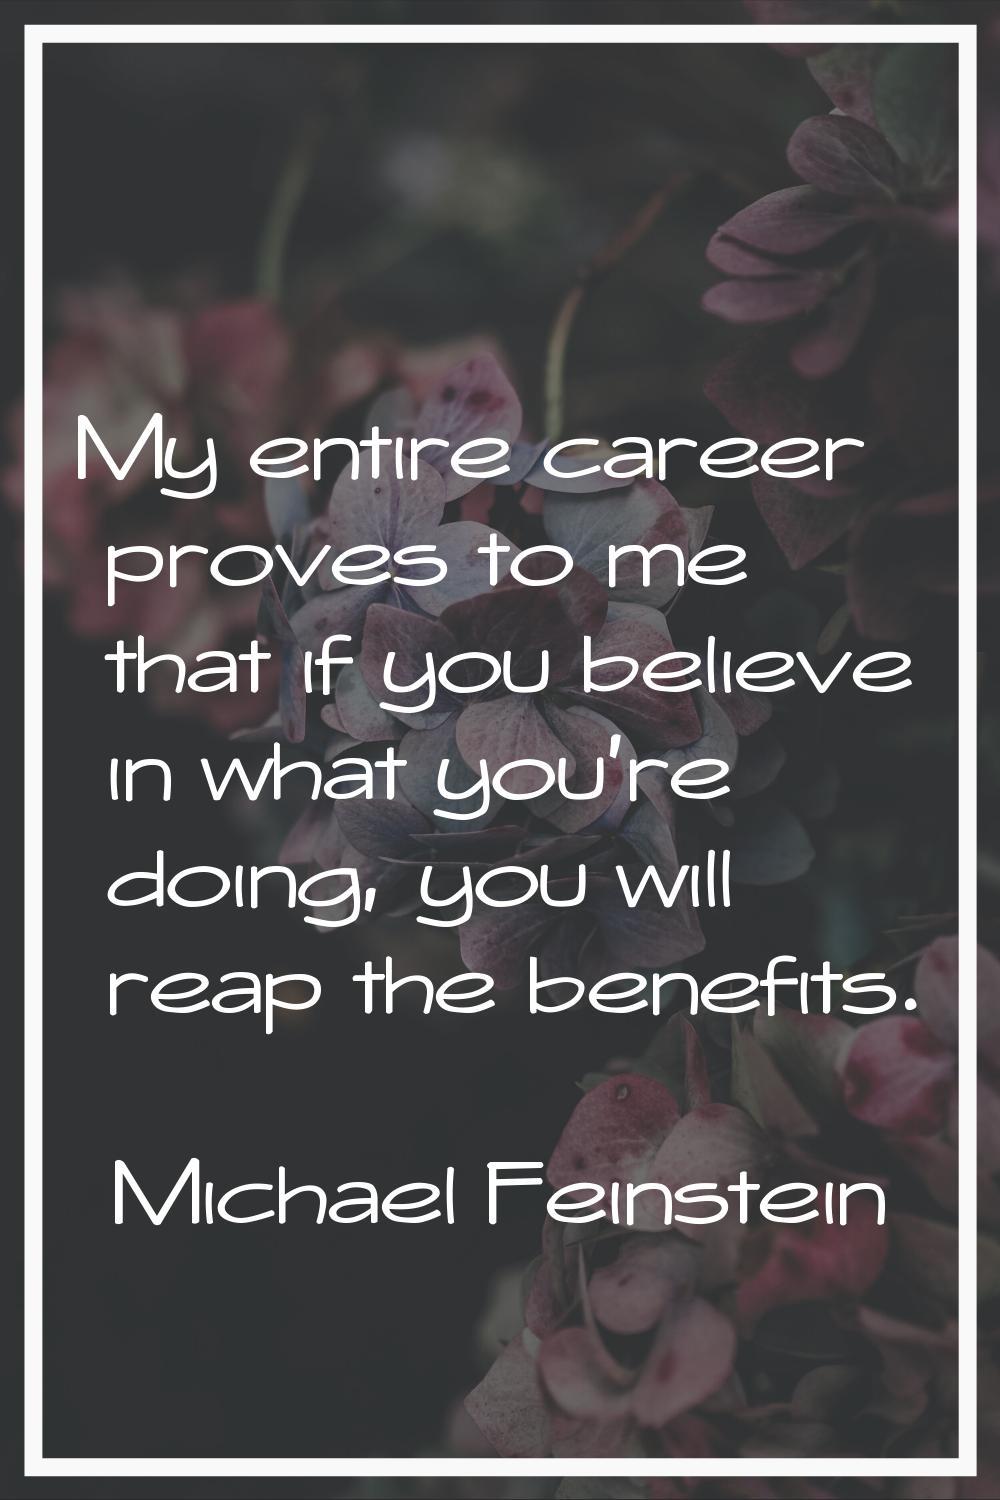 My entire career proves to me that if you believe in what you're doing, you will reap the benefits.